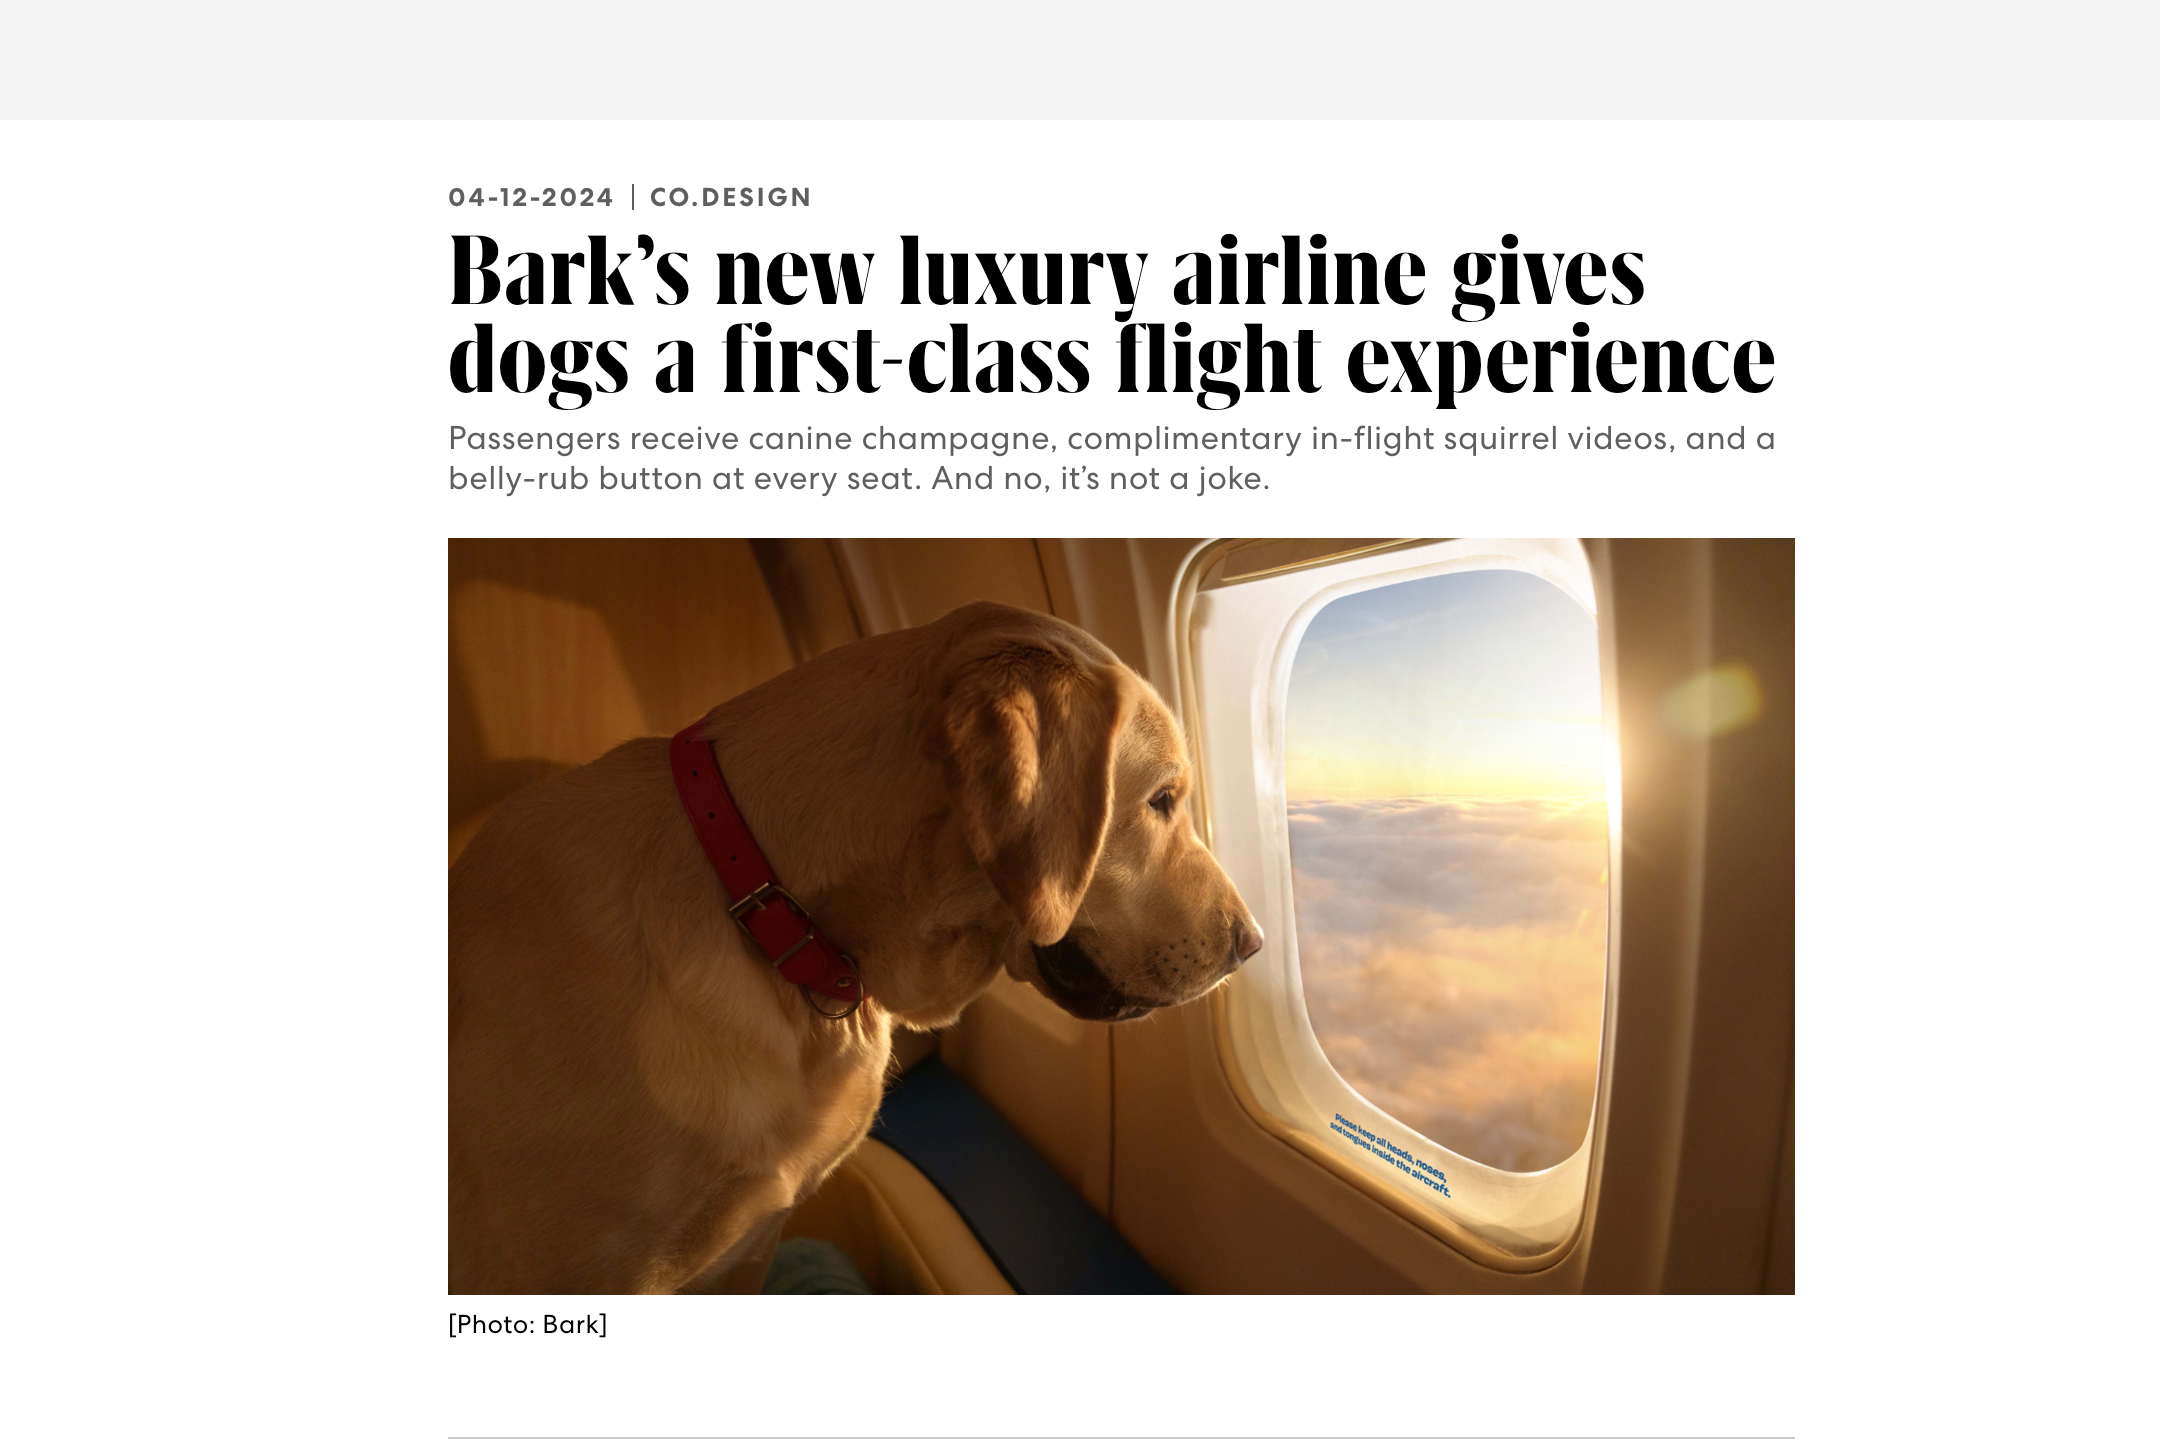 Fast Company: Tombras Partners with Bark to Create Airline for Dogs